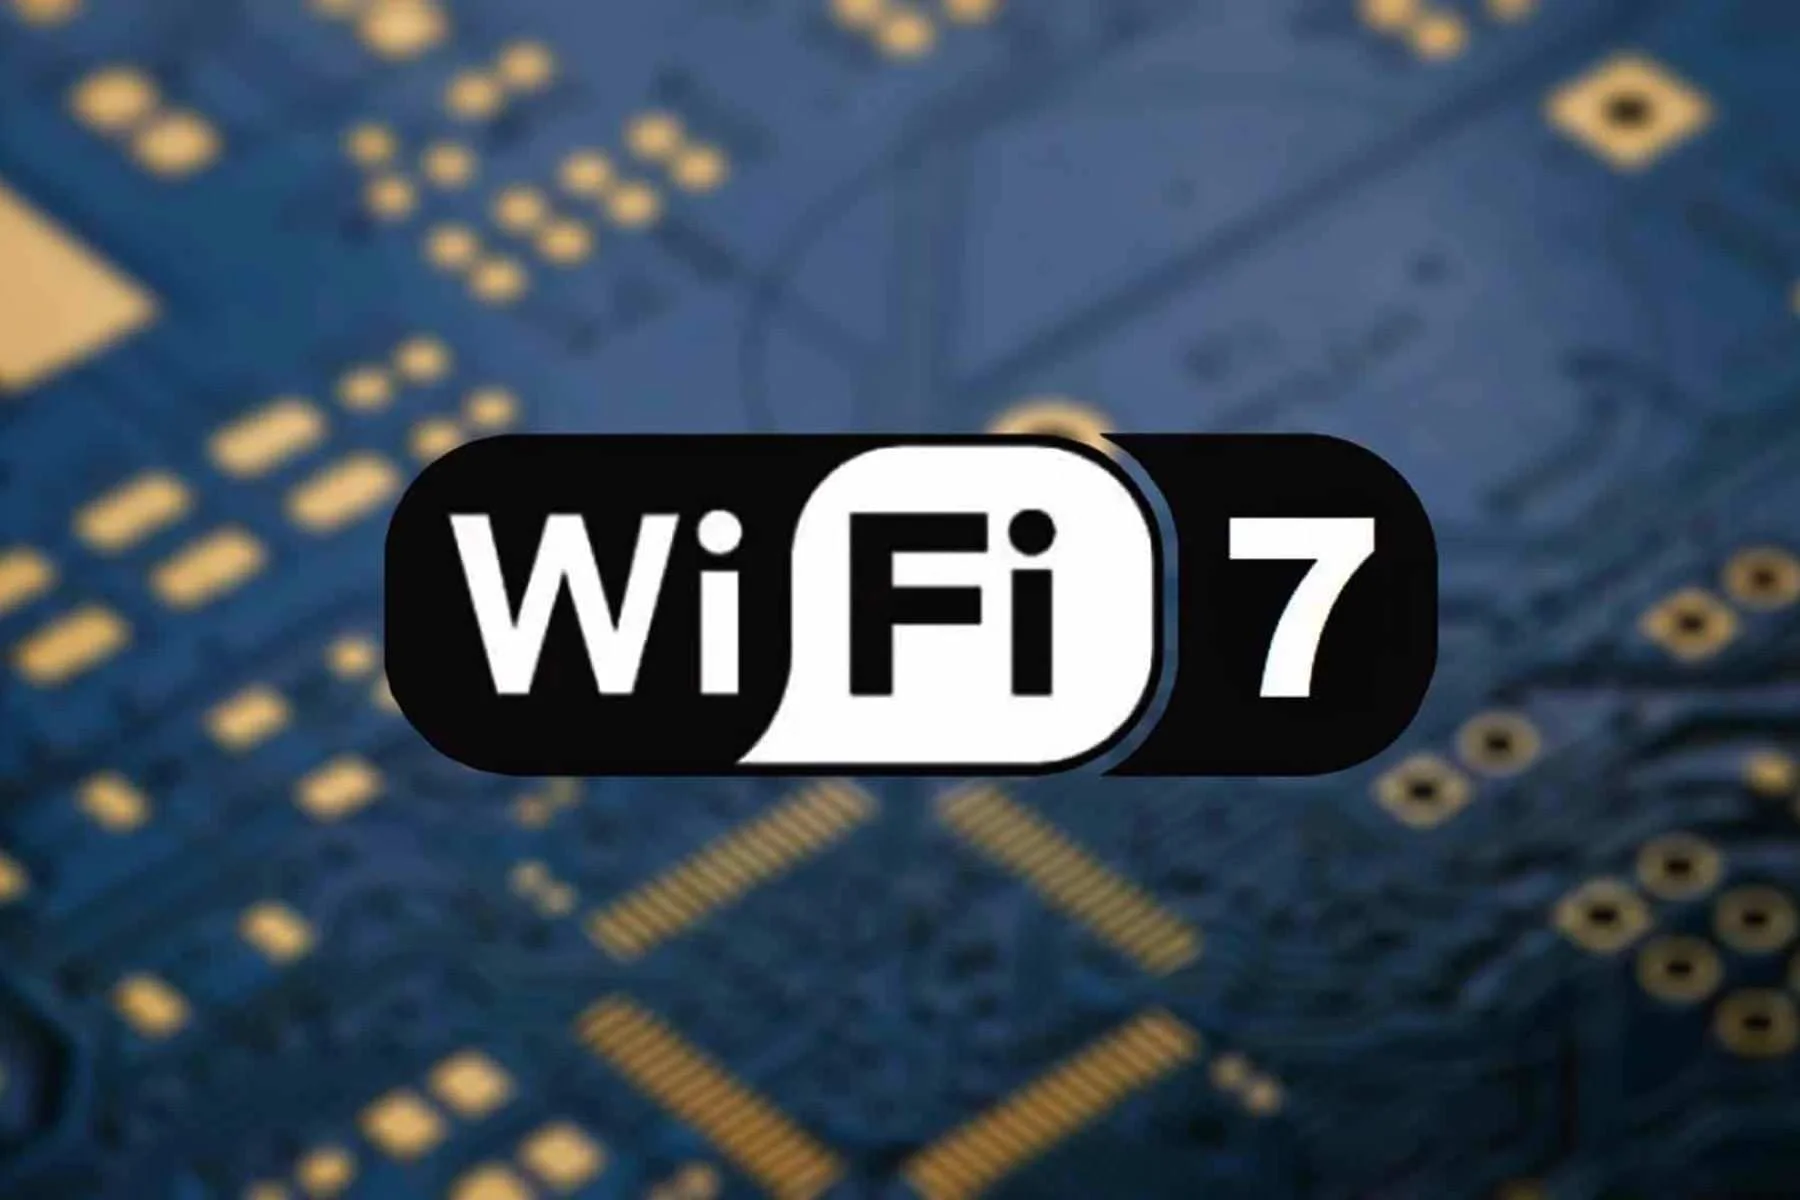 The announcement of Wi-Fi 7 chips for home routers from Qualcomm took place